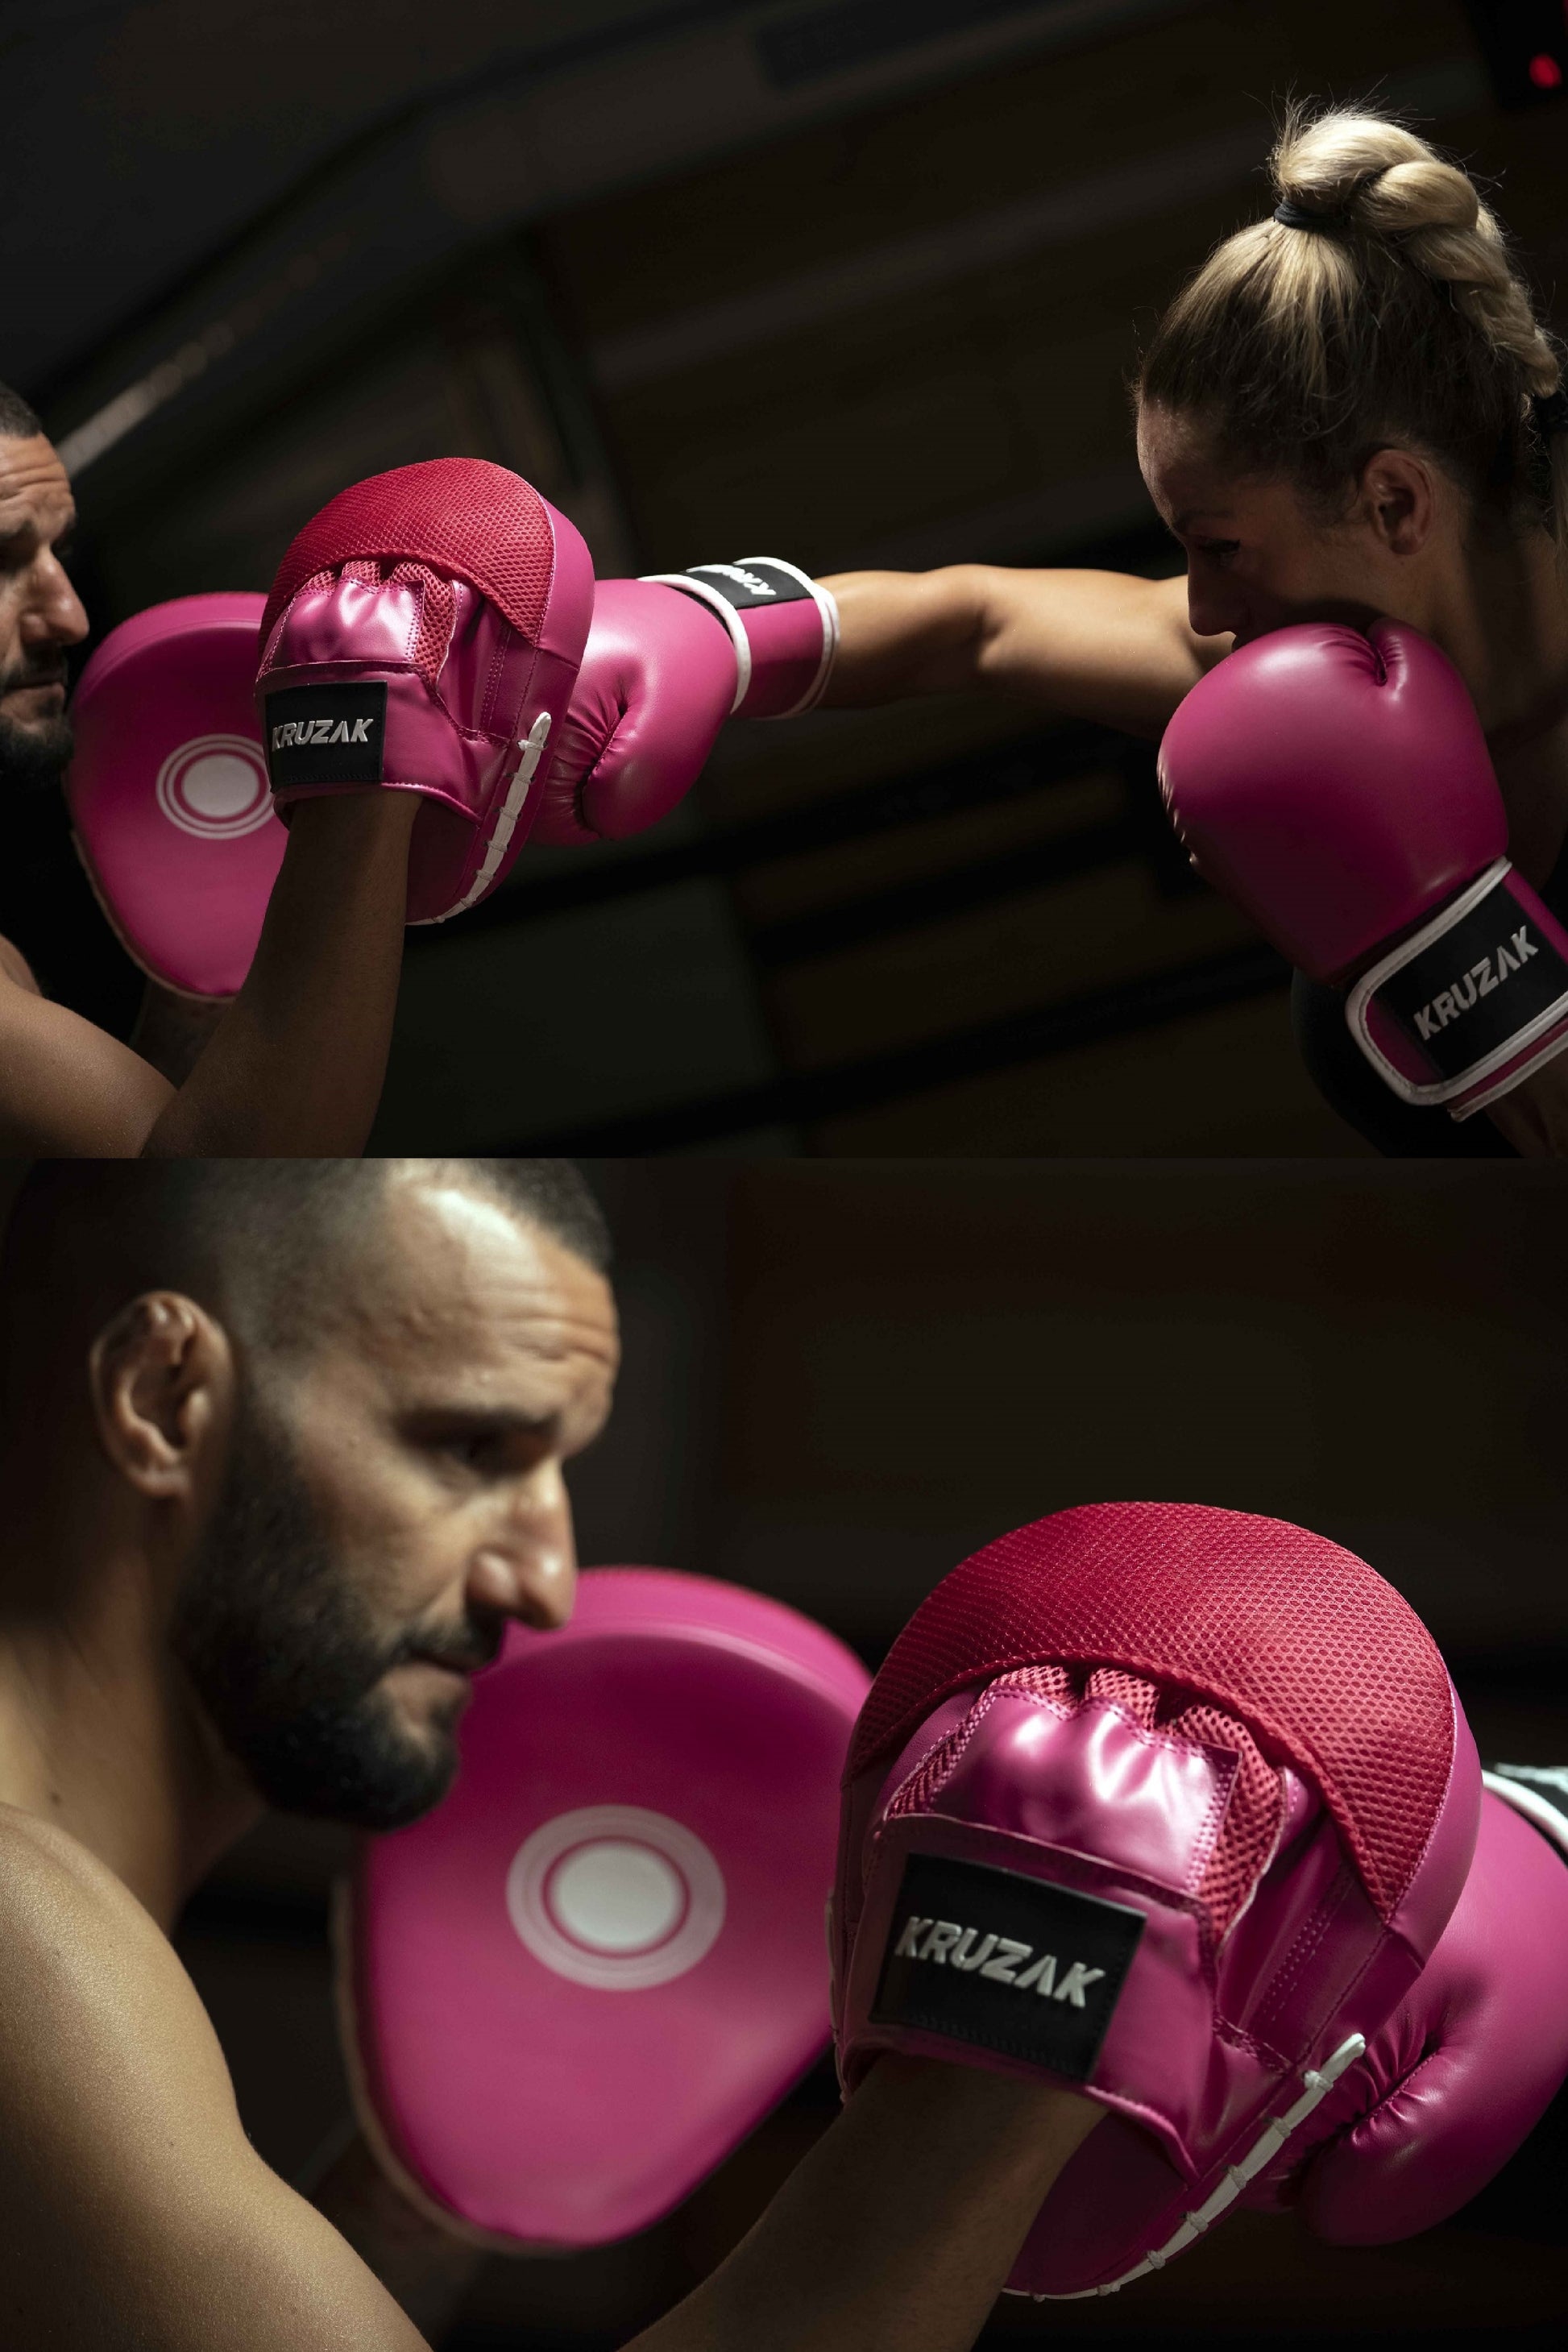 Product demonstration of Kruzak Unisex Pink Boxing Gloves and Focus Pads